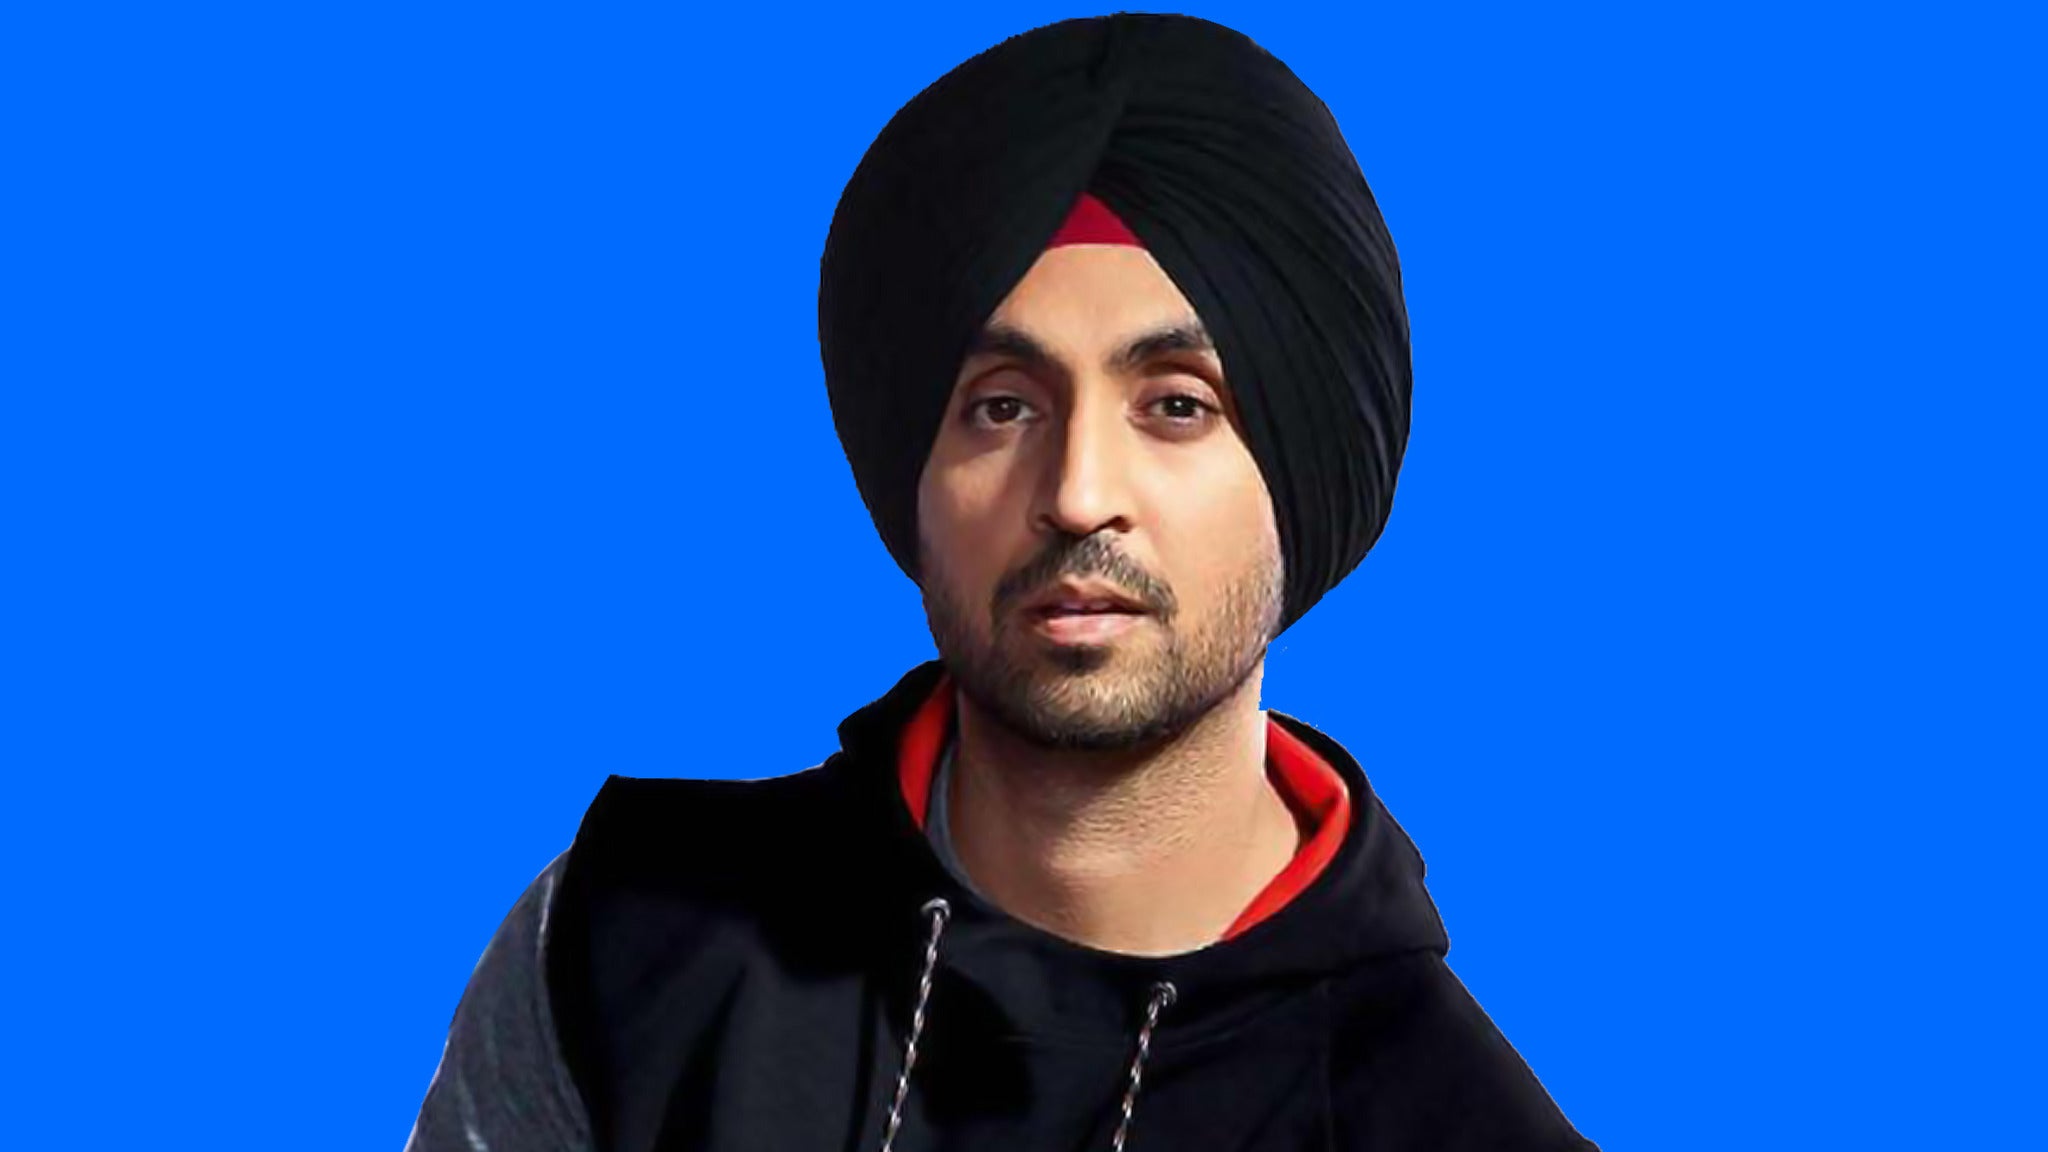 Diljit Dosanjh - Born To Shine World Tour						 in Vancouver promo photo for Artist presale offer code